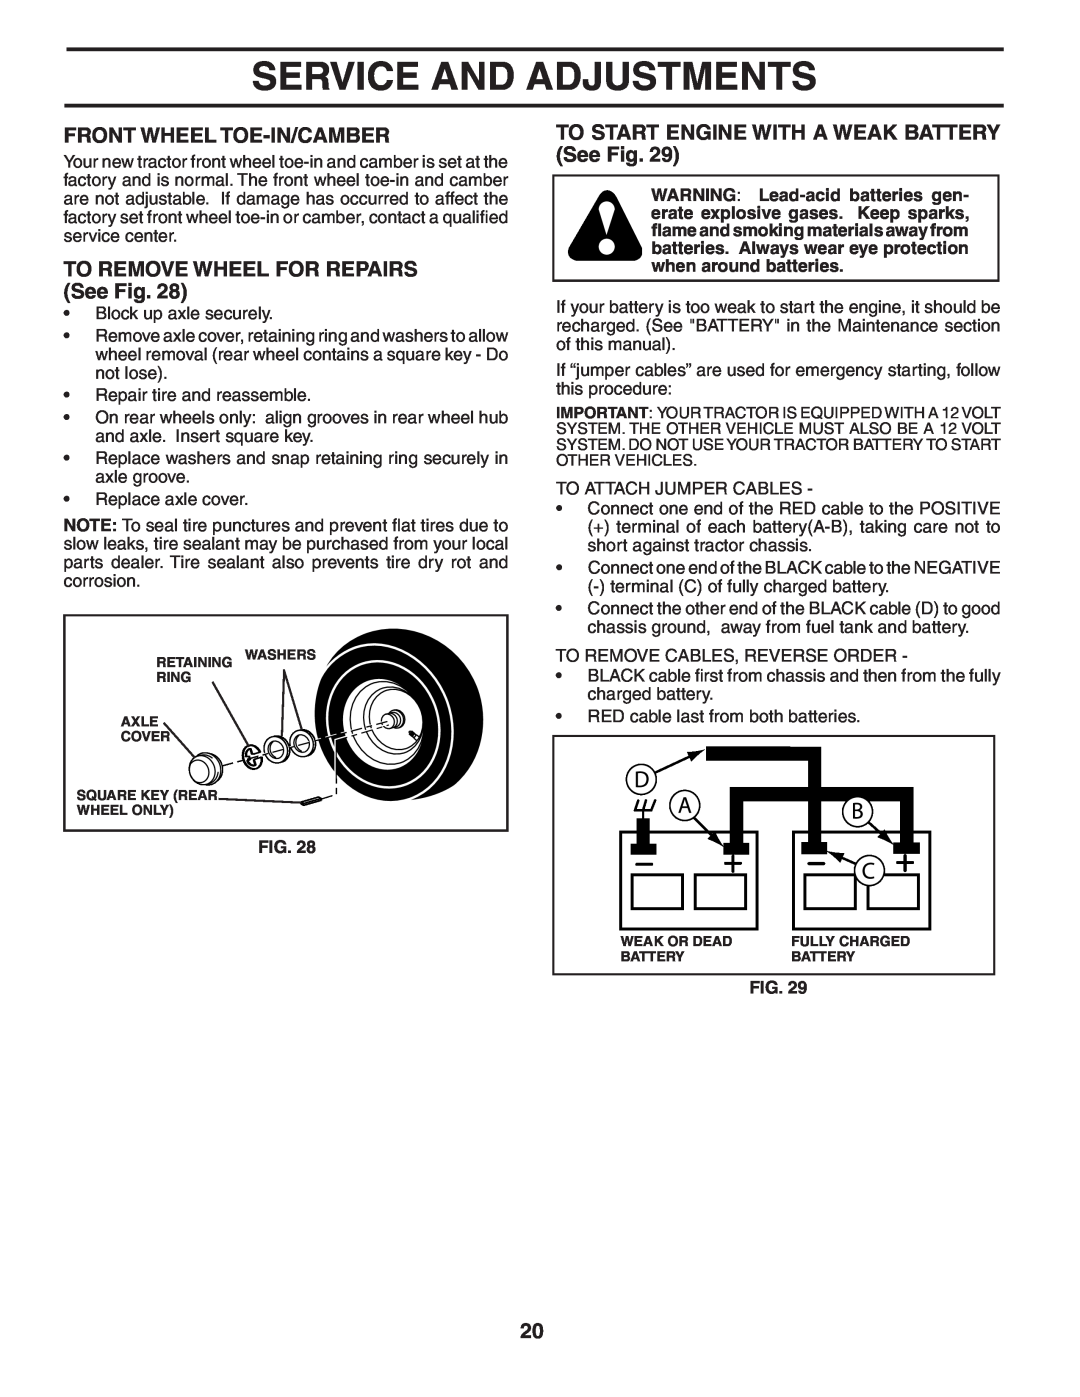 Husqvarna YT1942T owner manual Front Wheel Toe-In/Camber, TO REMOVE WHEEL FOR REPAIRS See Fig, Service And Adjustments 